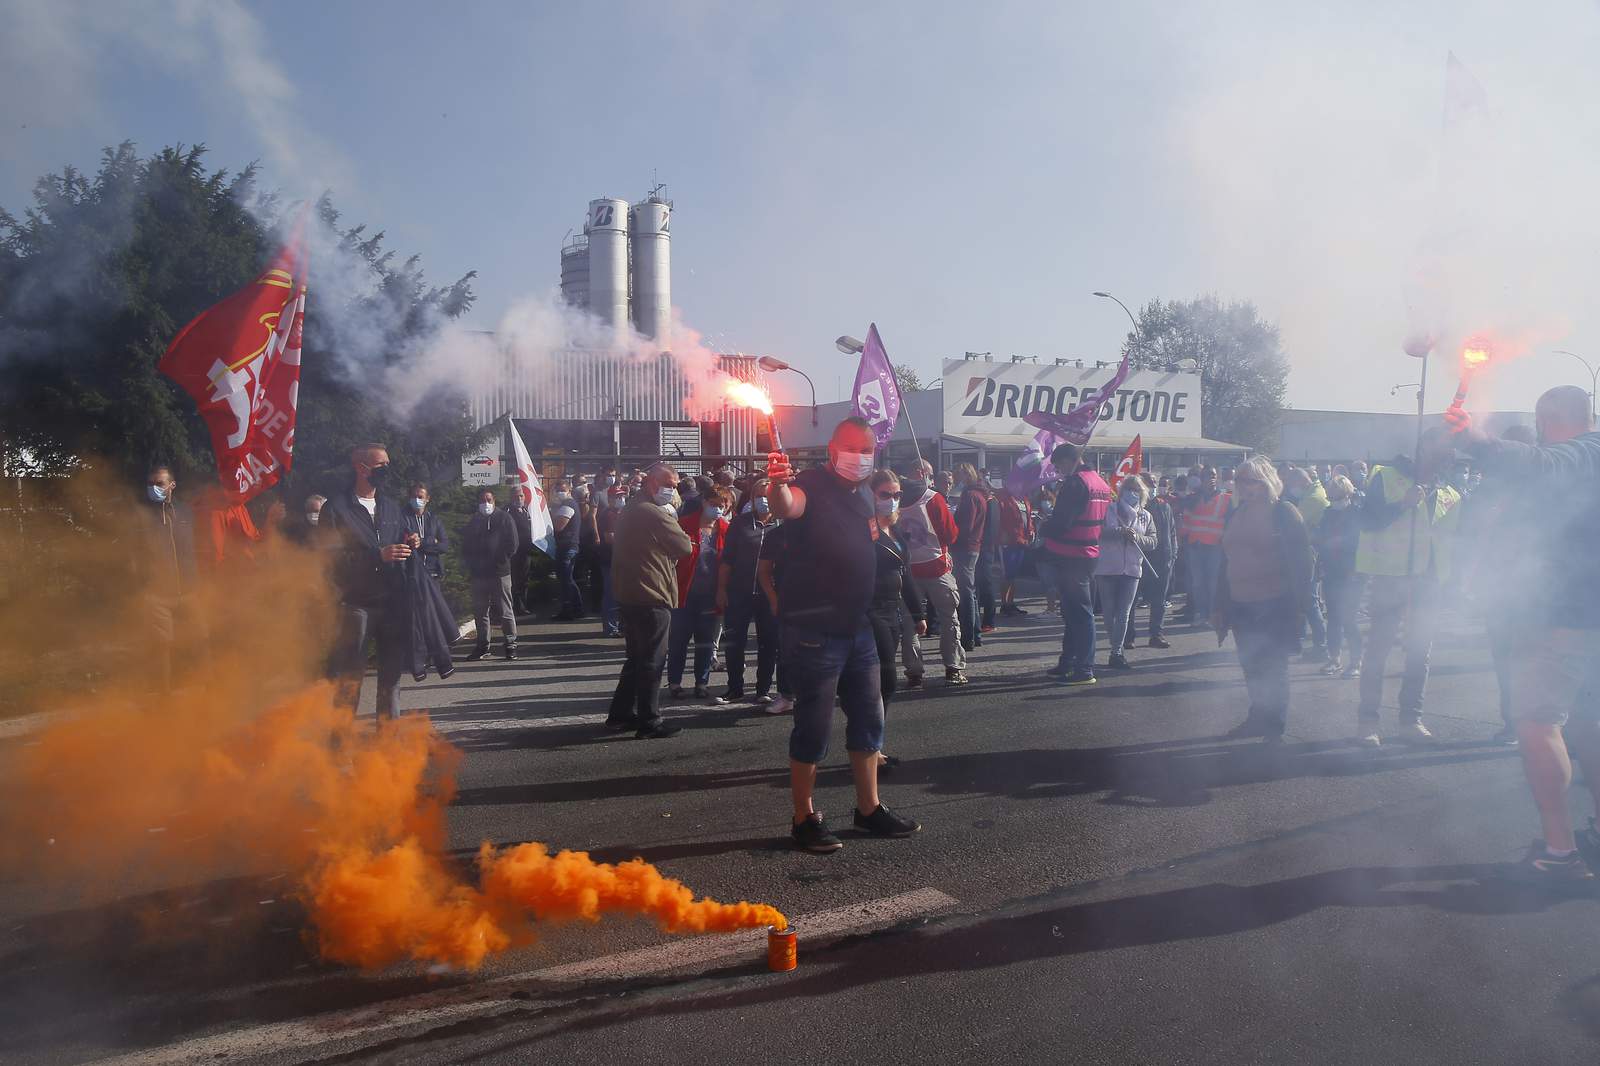 French unions protest tire factory closure amid virus crisis